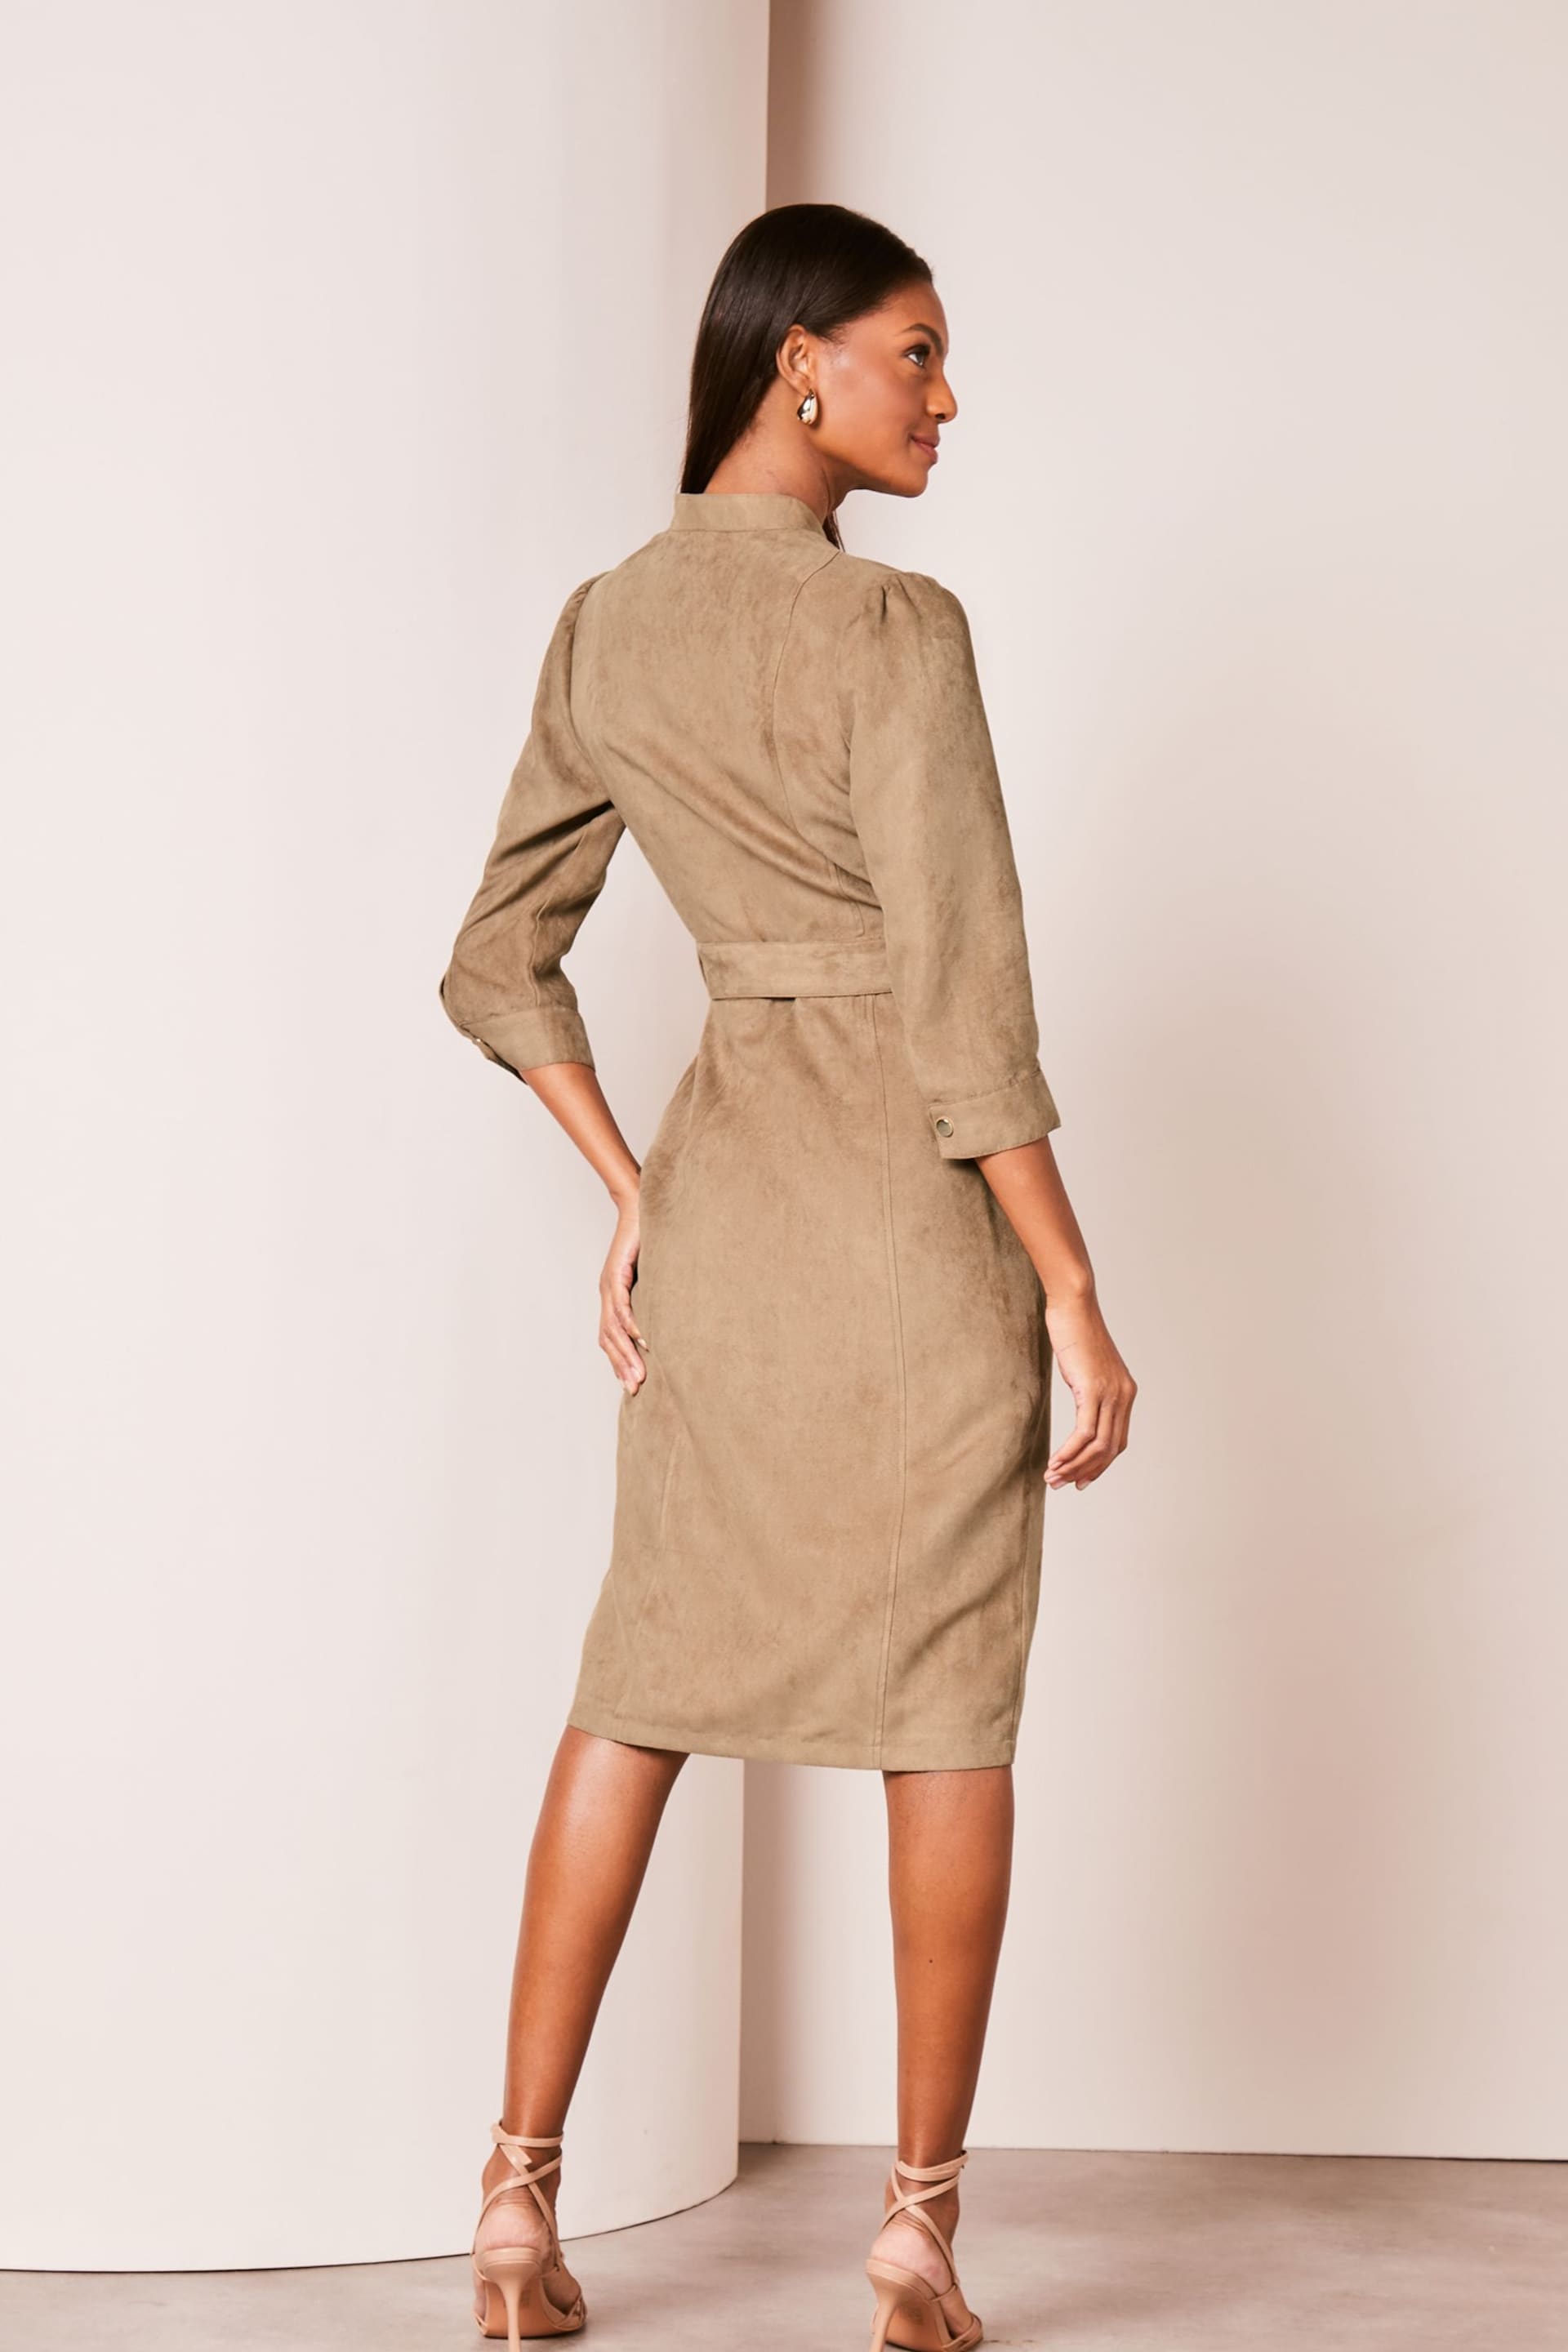 Lipsy Tan Suedette Collarless 3/4 Sleeve Belted Shirt Dress - Image 2 of 4